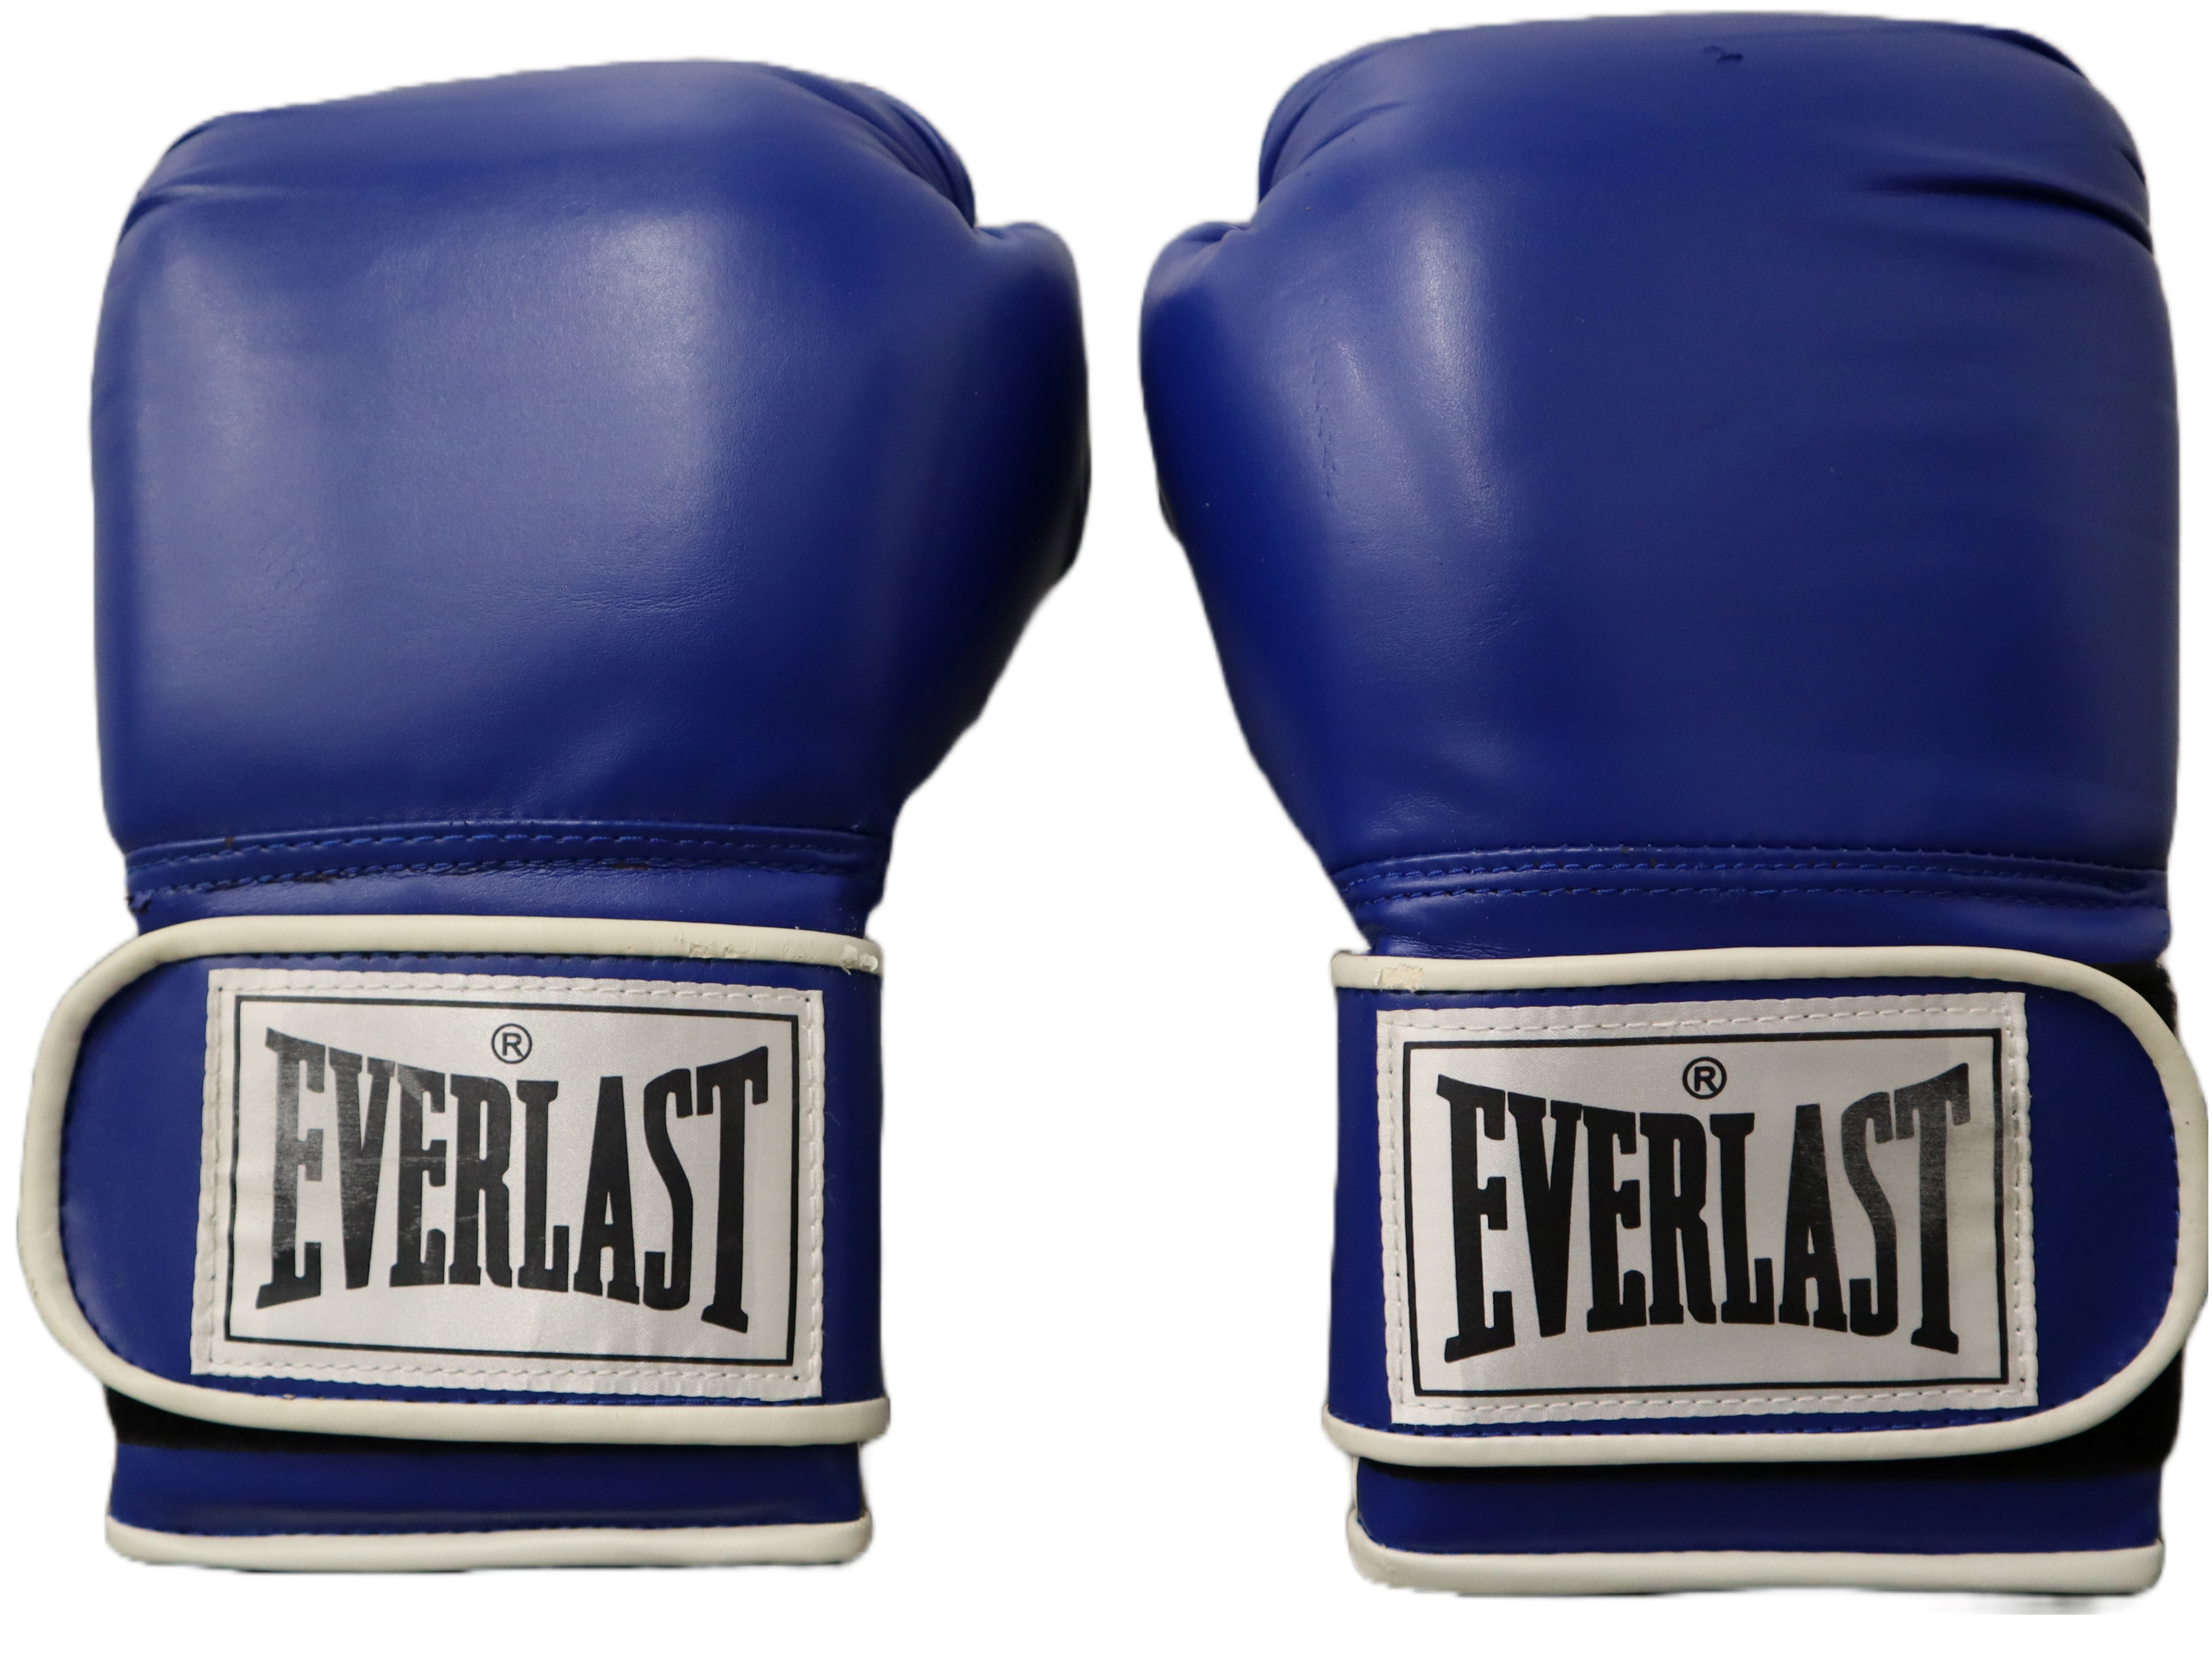 Used Everlast Blue Boxing Gloves Freeweights & Accessories